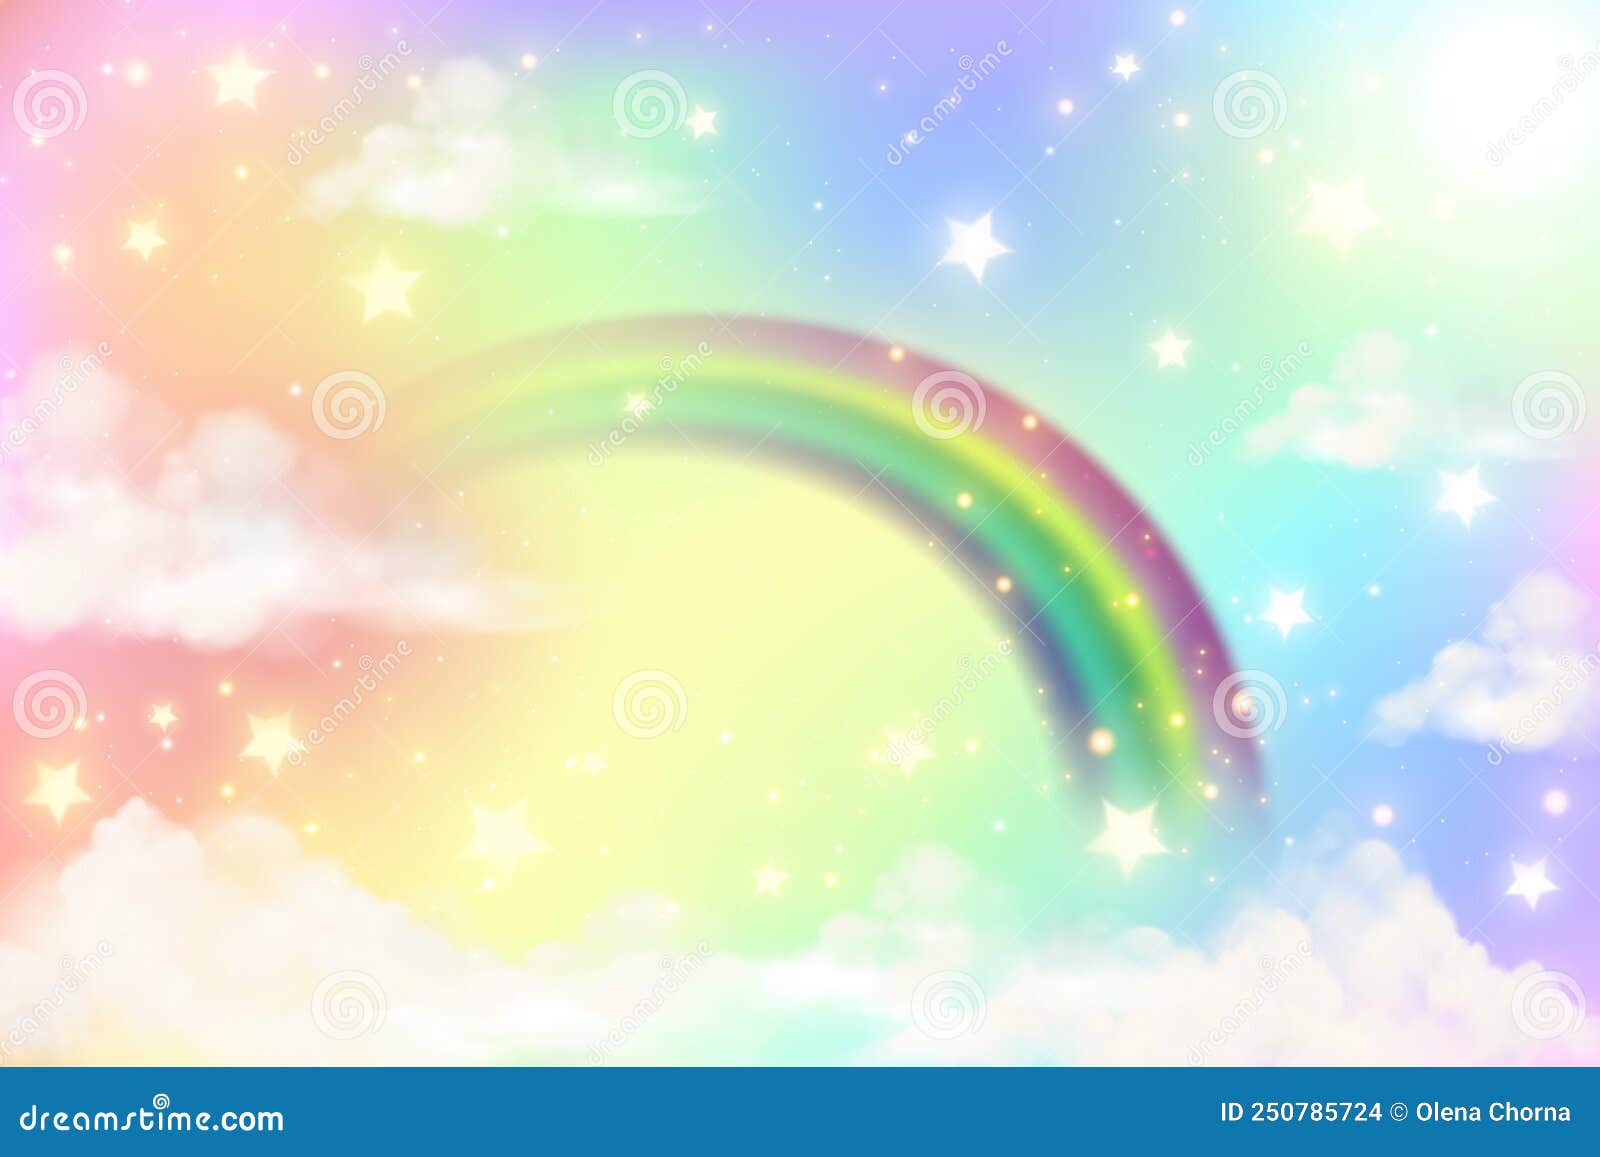 Pastel Rainbow Background Stock Illustrations  74182 Pastel Rainbow  Background Stock Illustrations Vectors  Clipart  Dreamstime